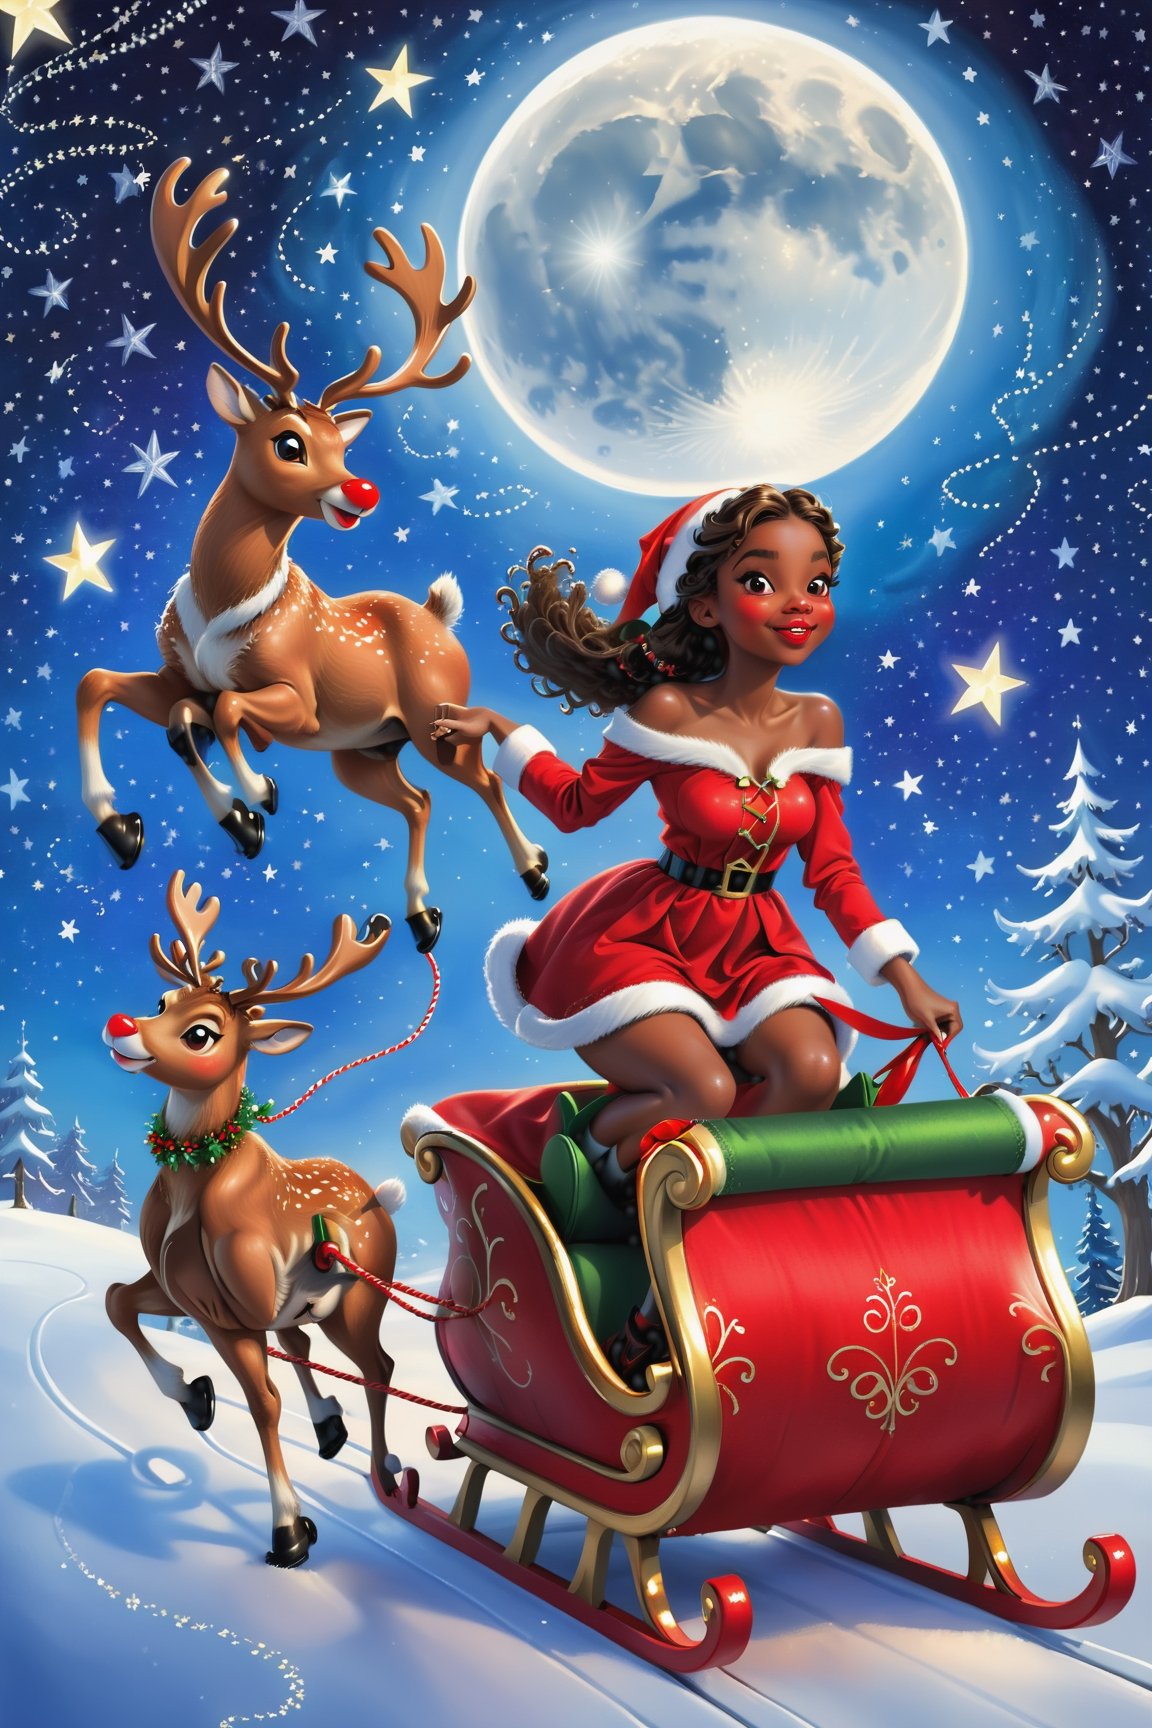 best quality, realistic, photorealistic, award-winning illustration, (intricate details: 1.2), (delicate detail), (intricate details), wonderful christmas night, polar lights, ((Dark skinned pretty girl wearing Santa's outfit is riding on sleigh pulled by the Red Nosed Reindeer)), flying to the sky, a round moon, starry sky, shooting star, Christmas night,danknis,anitoon style